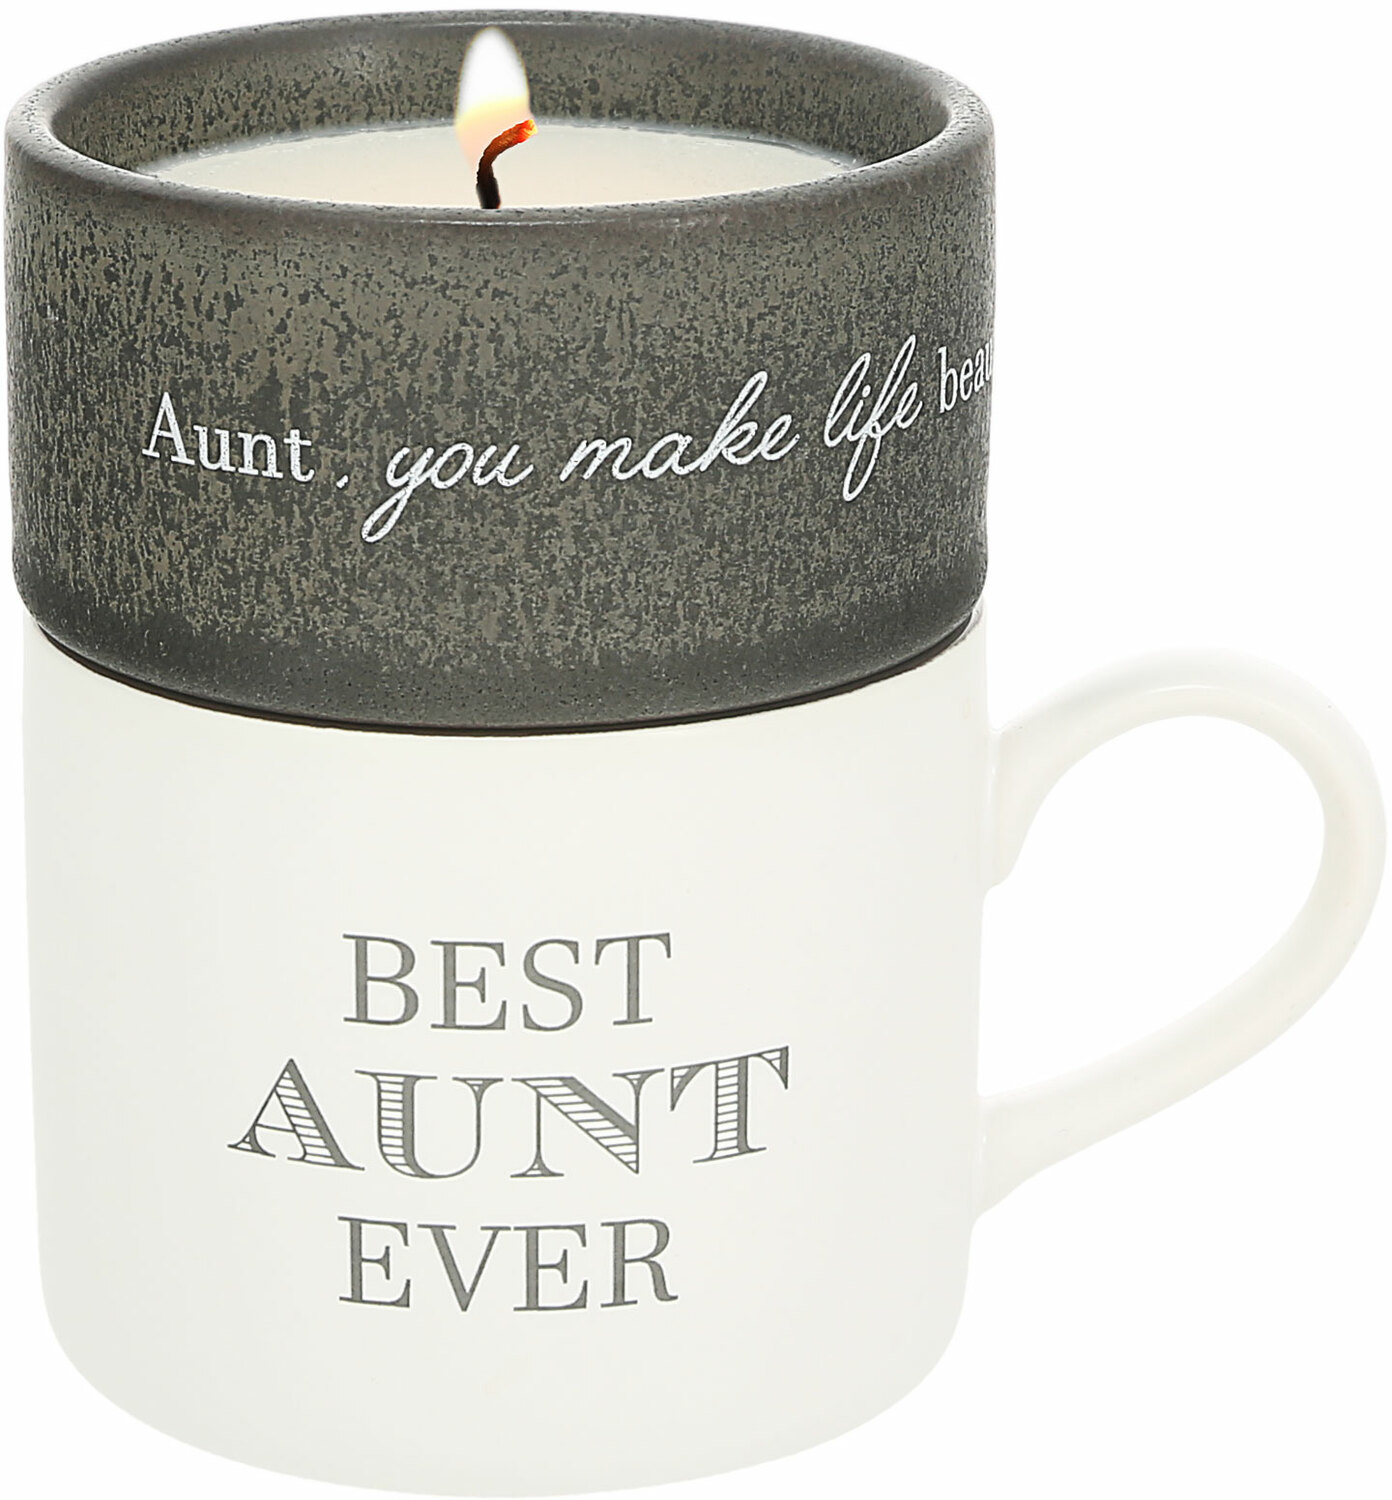 Aunt by Filled with Warmth - Aunt - Stacking Mug and Candle Set
100% Soy Wax Scent: Tranquility